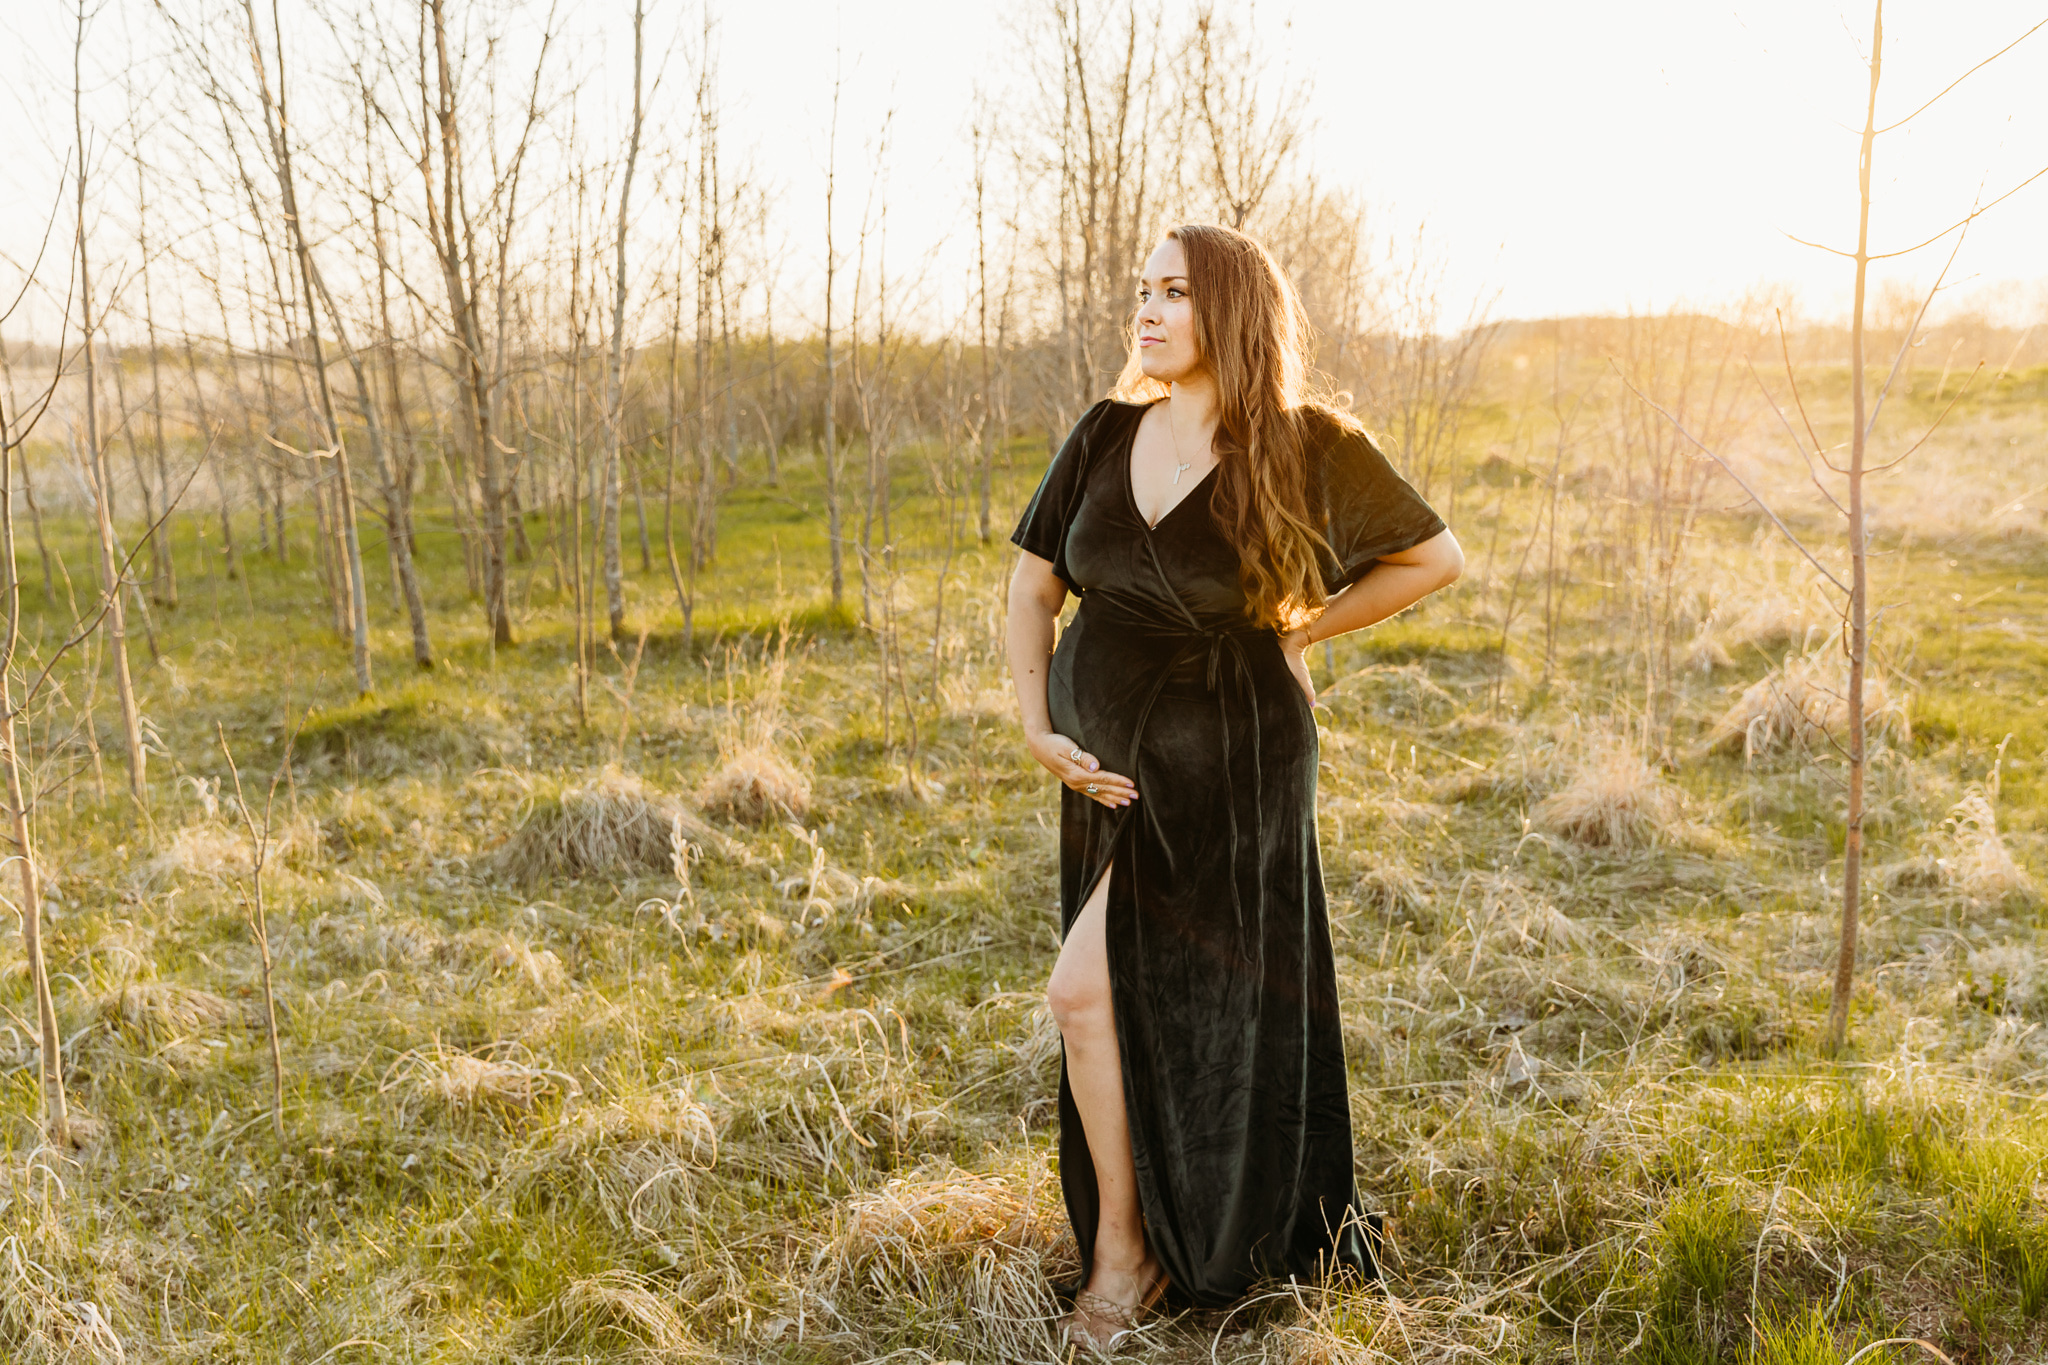 A mom to be holds her bump while standing in a field surrounded by trees with no leaves